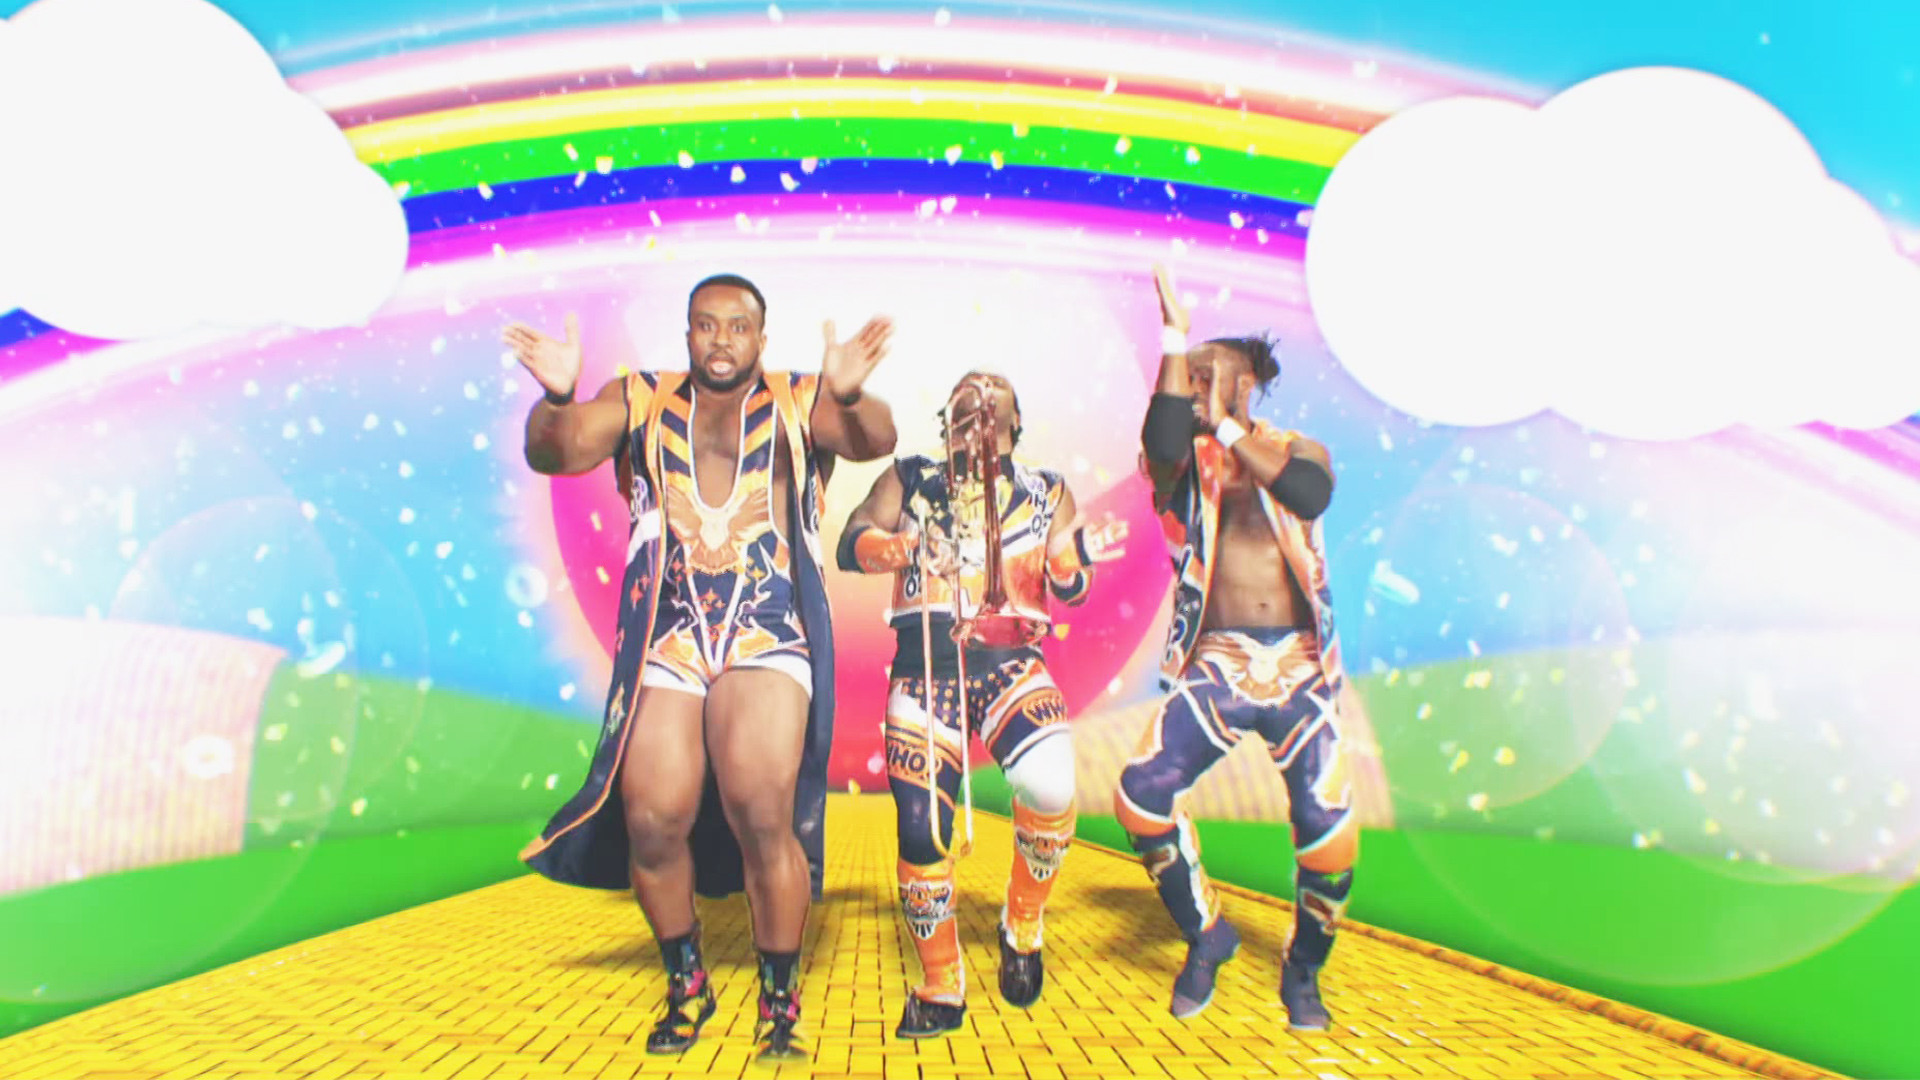 1920x1080 The New Day is coming to the Team Blue: SmackDown LIVE, April 11, 2017 | WWE